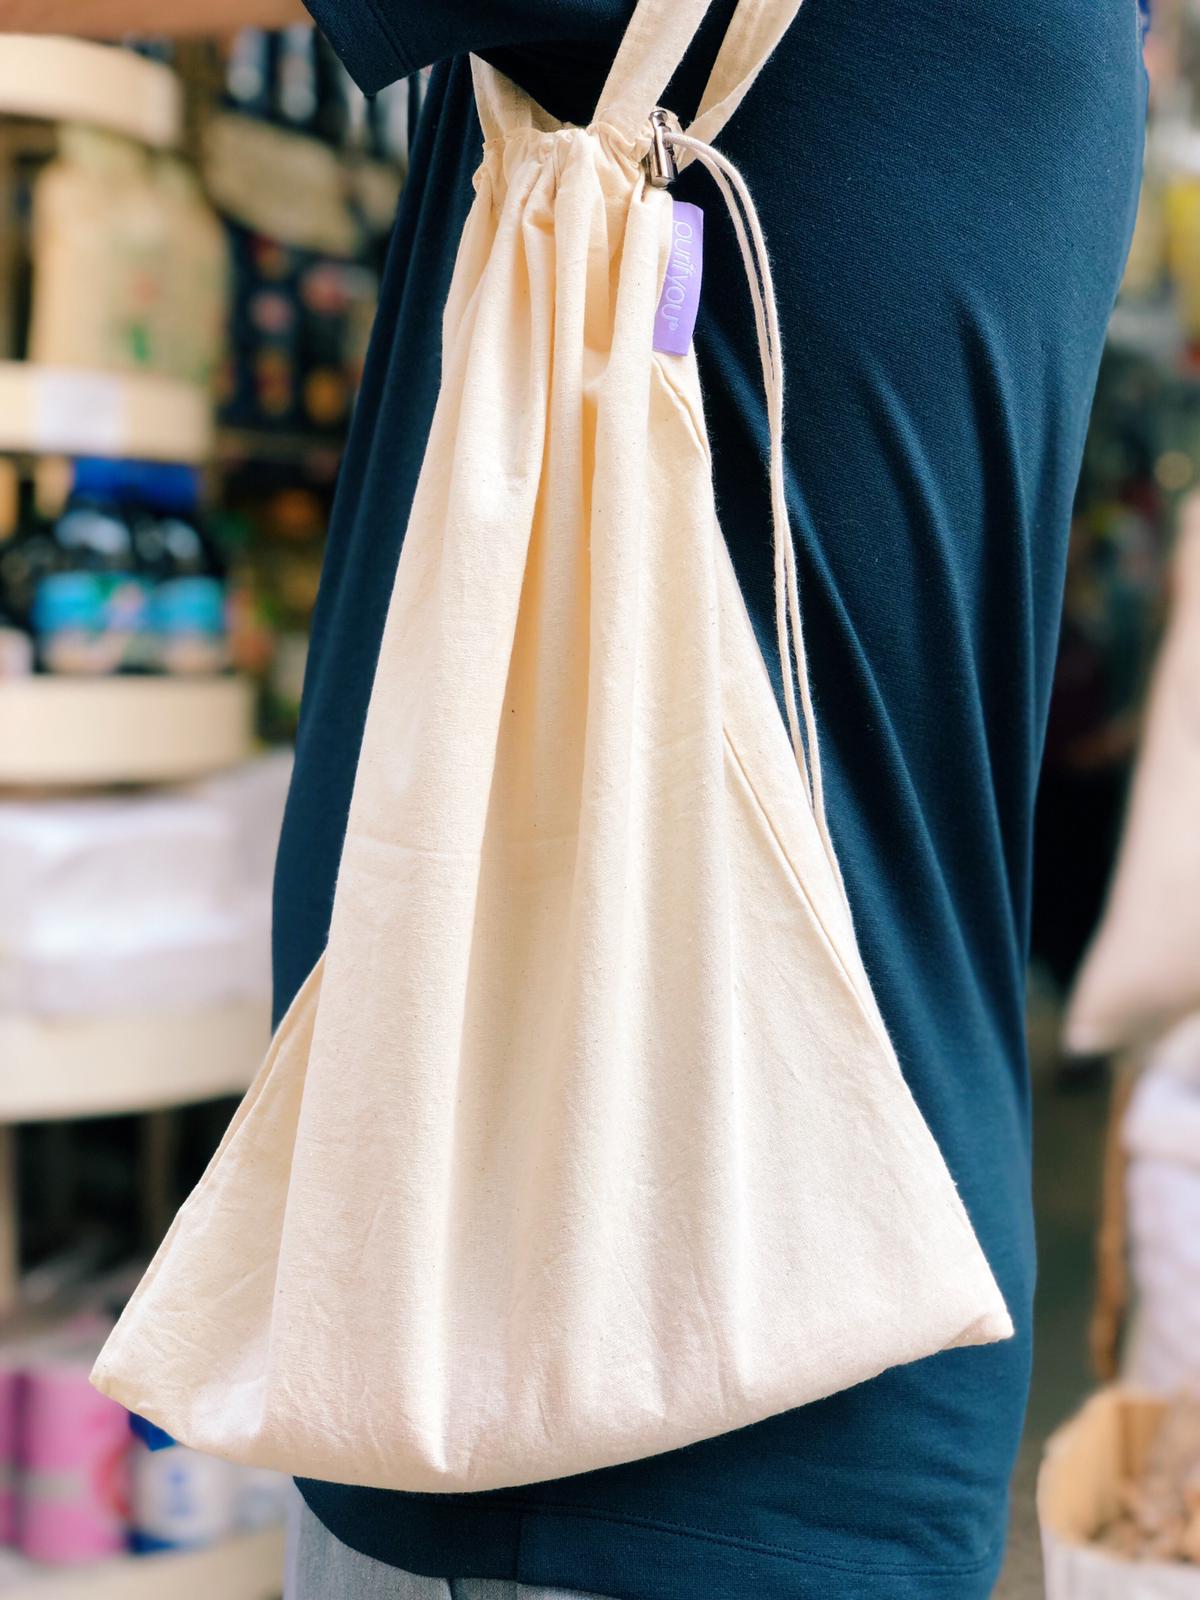 Fresh new organic cotton bags now... - Uprooted Market & Cafe | Facebook